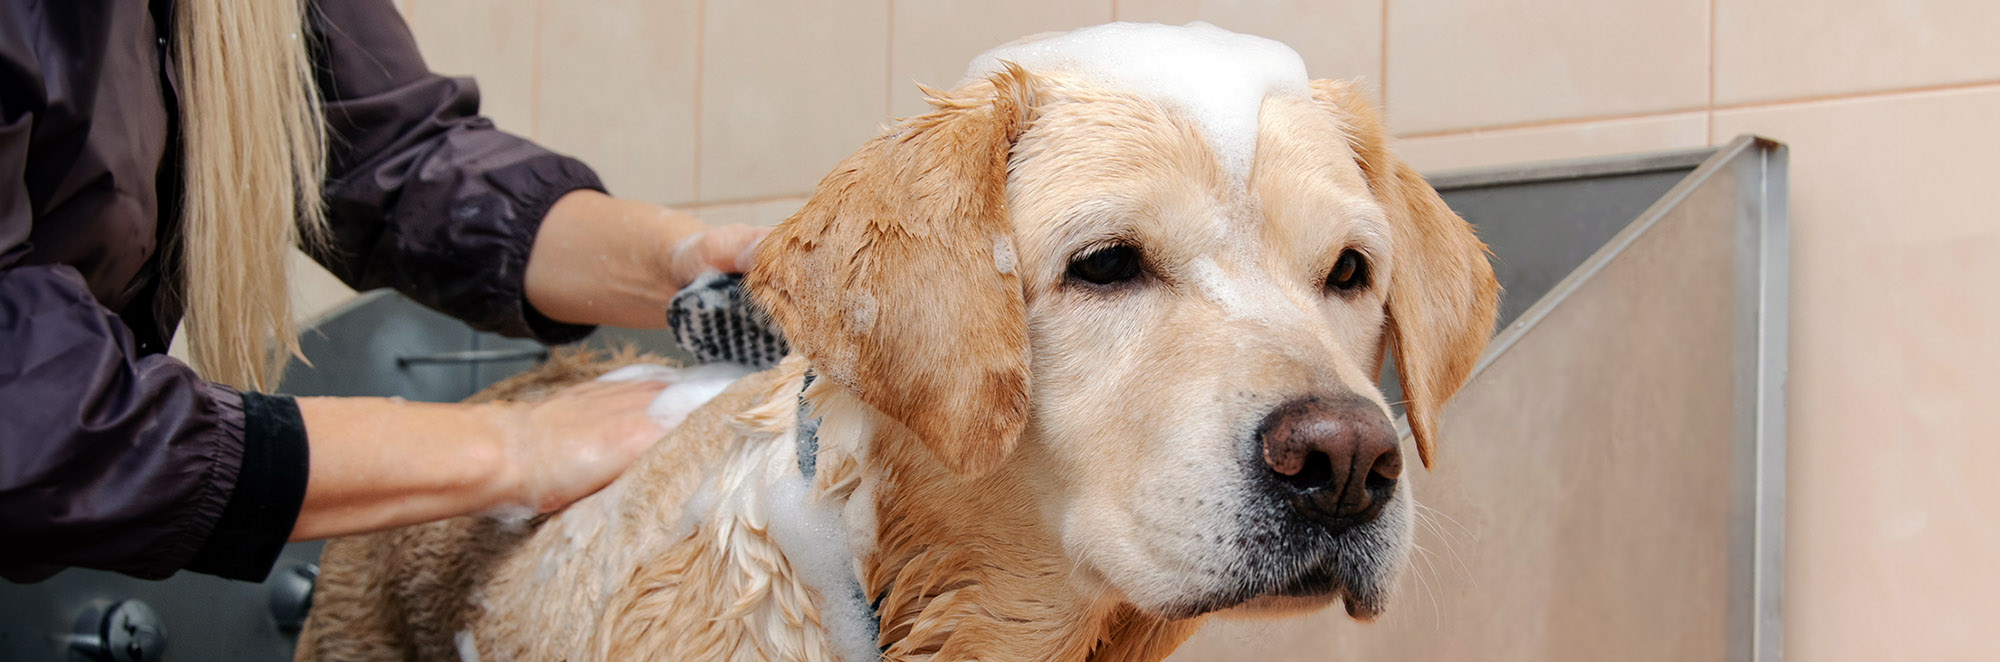 groomer cleaning and disinfecting for animal care